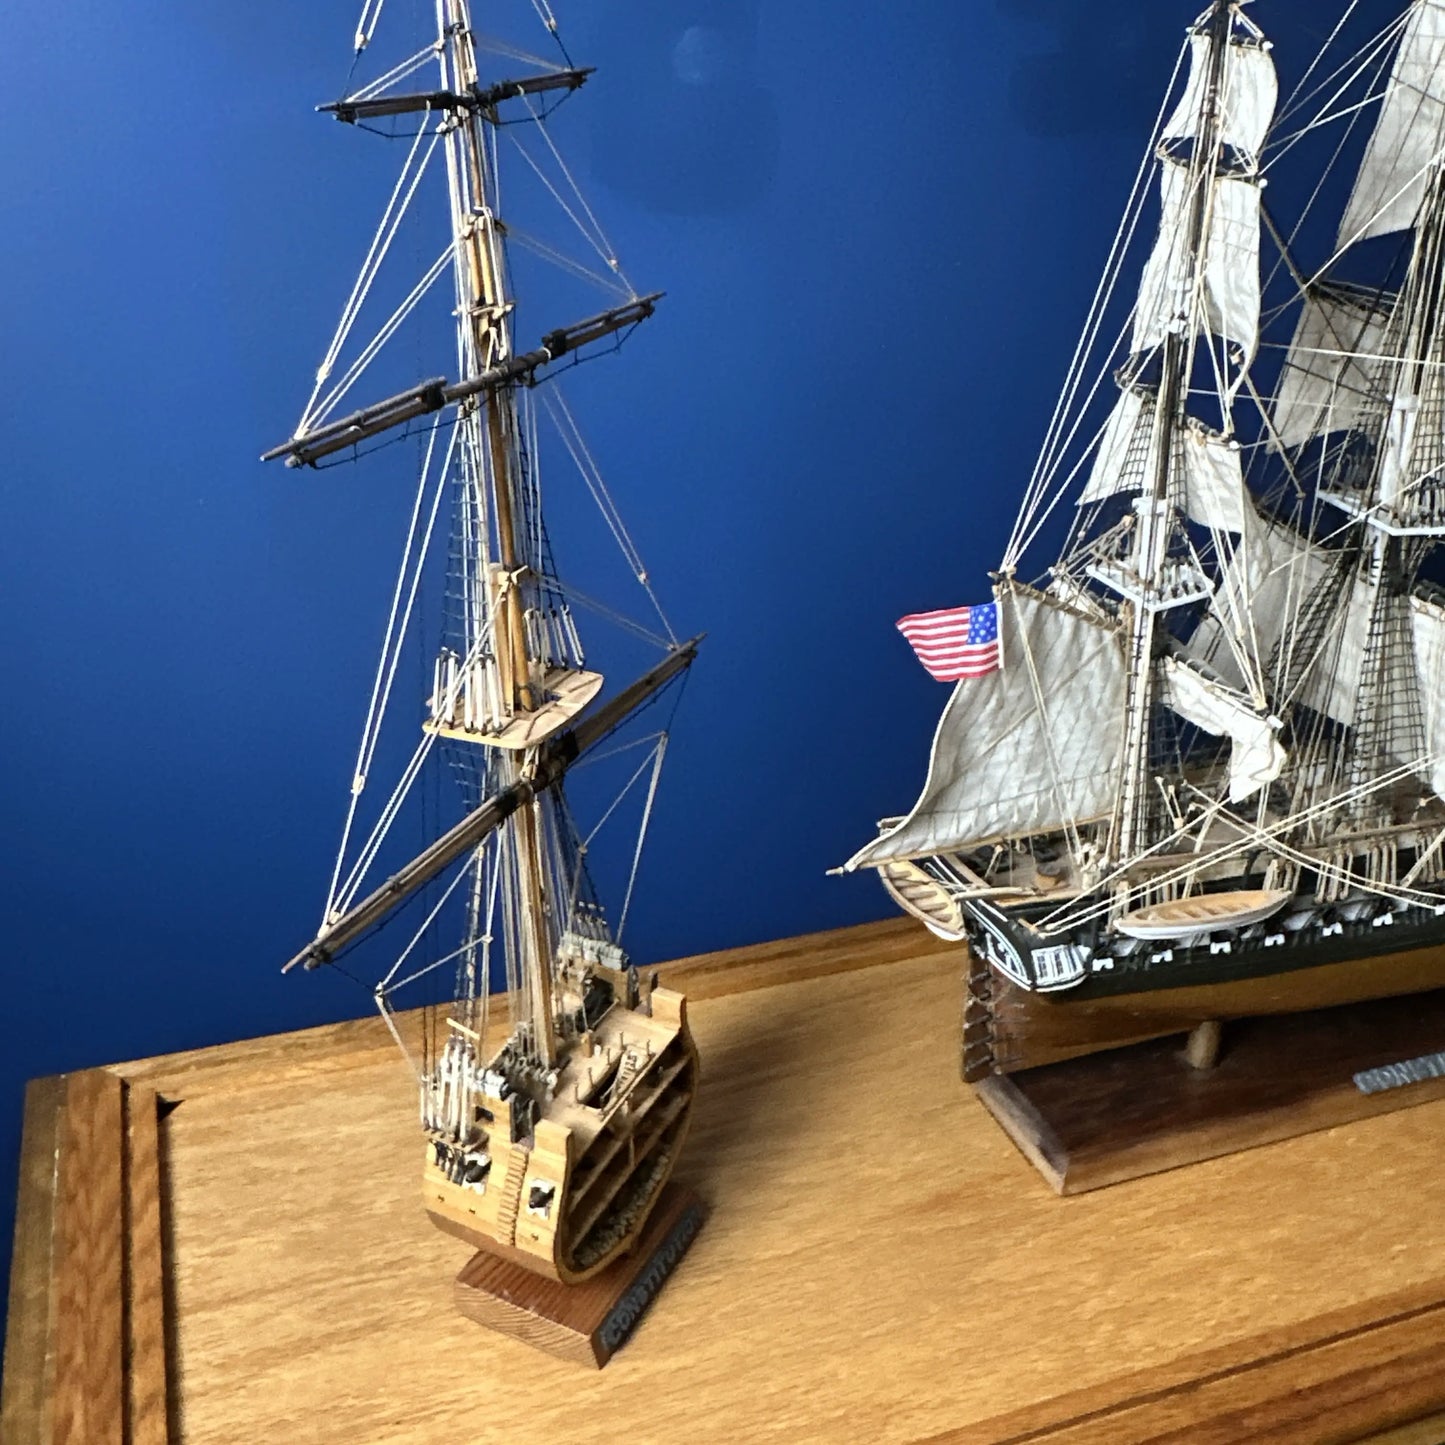 USS Constitution Models—Enclosed in glass with a custom built display table